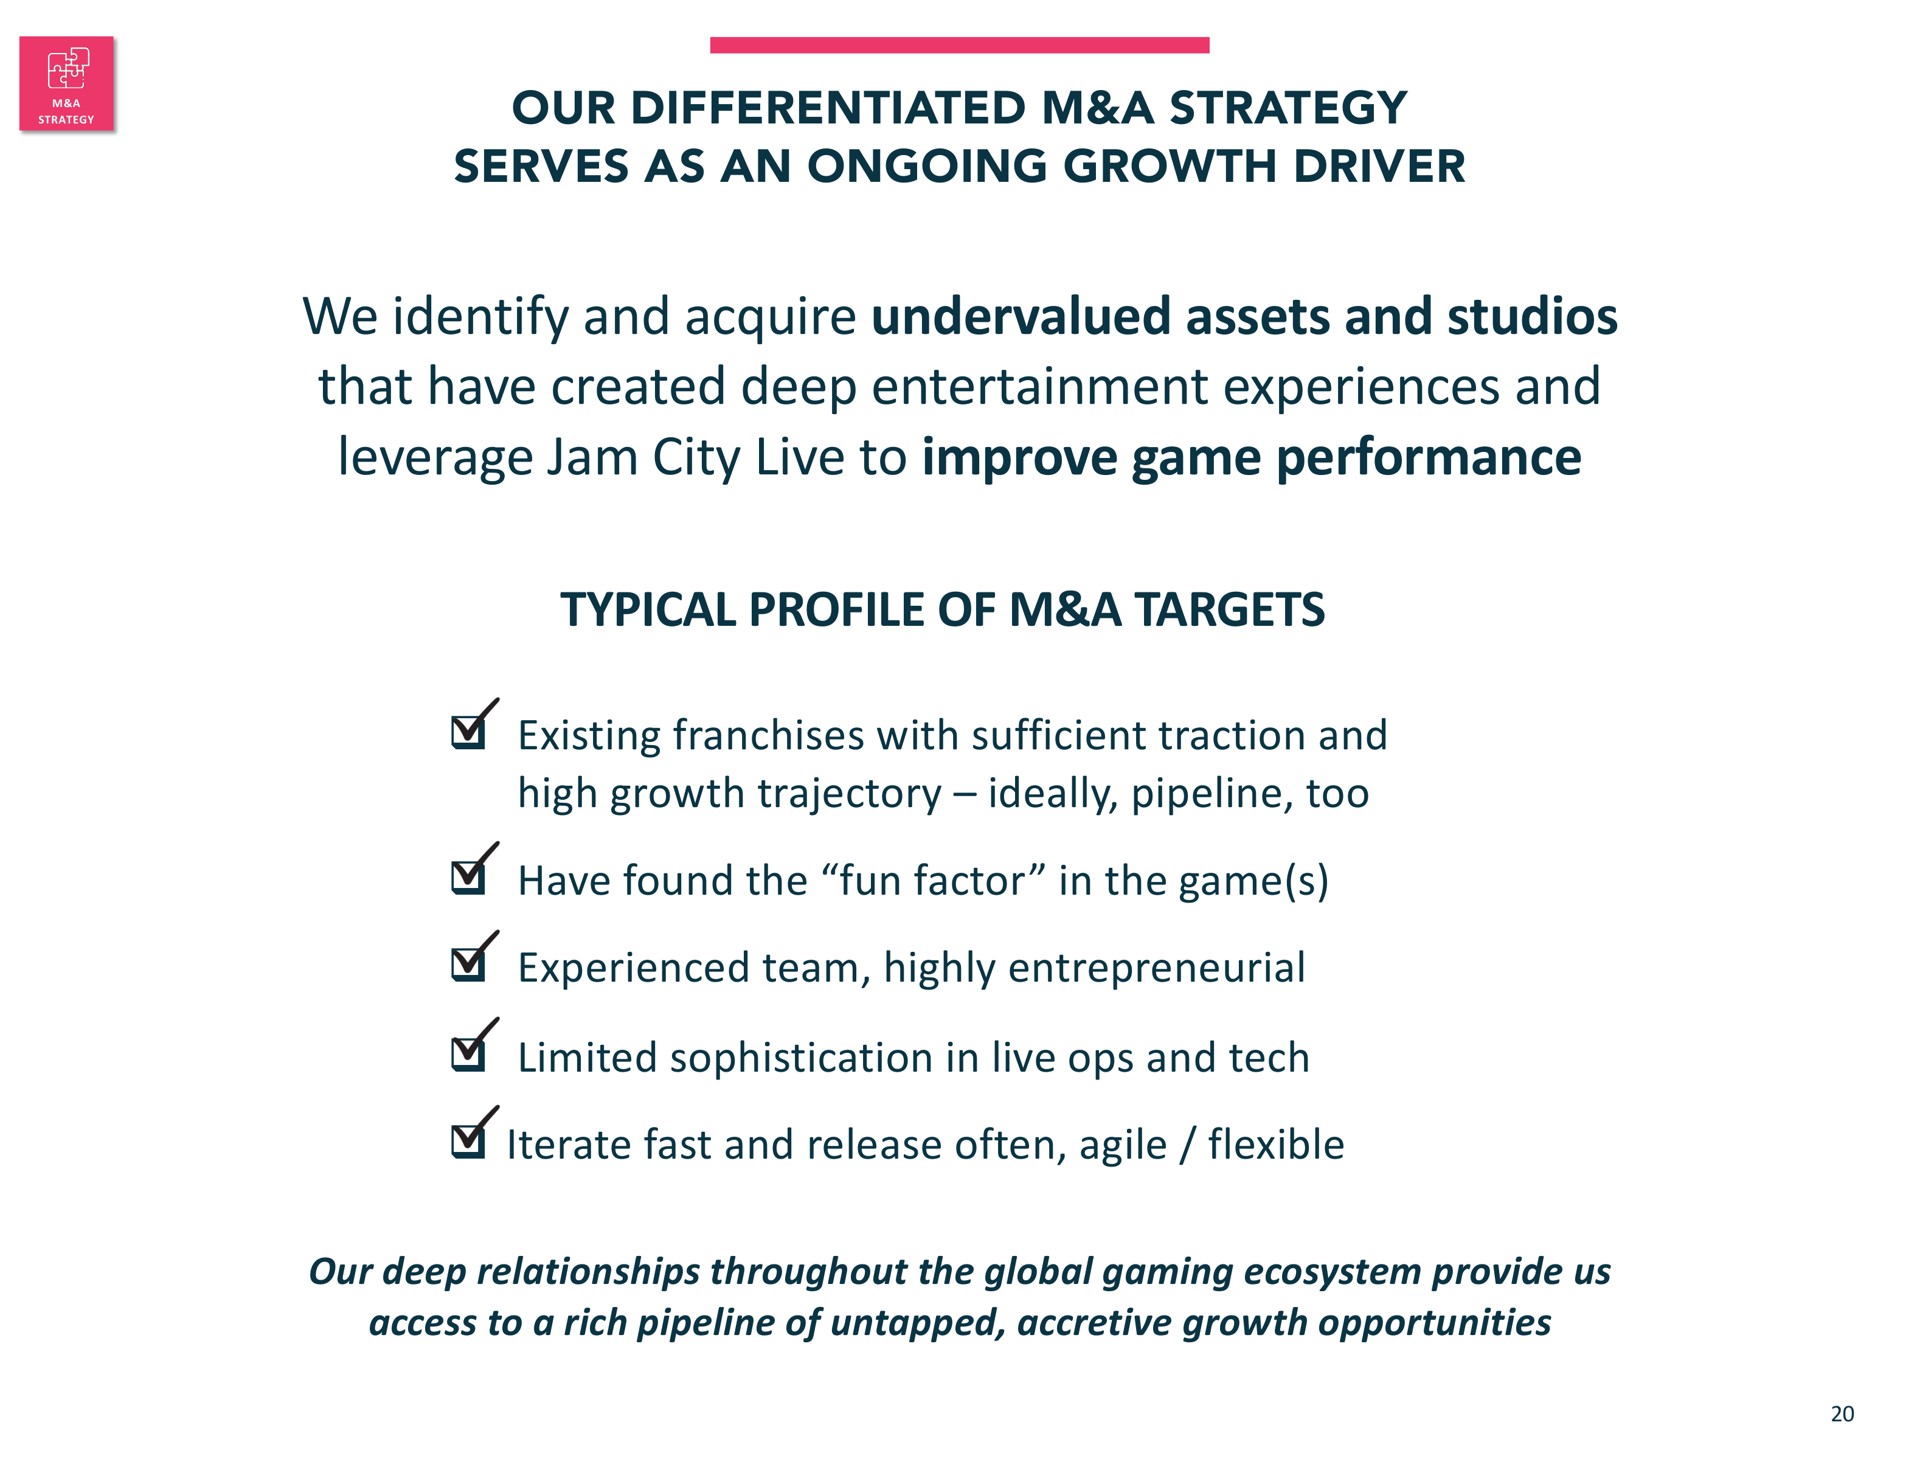 our differentiated a strategy serves as an ongoing growth driver we identify and acquire undervalued assets and studios that have created deep entertainment experiences and leverage jam city live to improve game performance typical profile of a targets existing franchises with sufficient traction and high growth trajectory ideally pipeline too have found the fun factor in the game experienced team highly entrepreneurial limited sophistication in live and tech iterate fast and release often agile flexible our deep relationships throughout the global gaming ecosystem provide us access to a rich pipeline of untapped accretive growth opportunities | Jam City